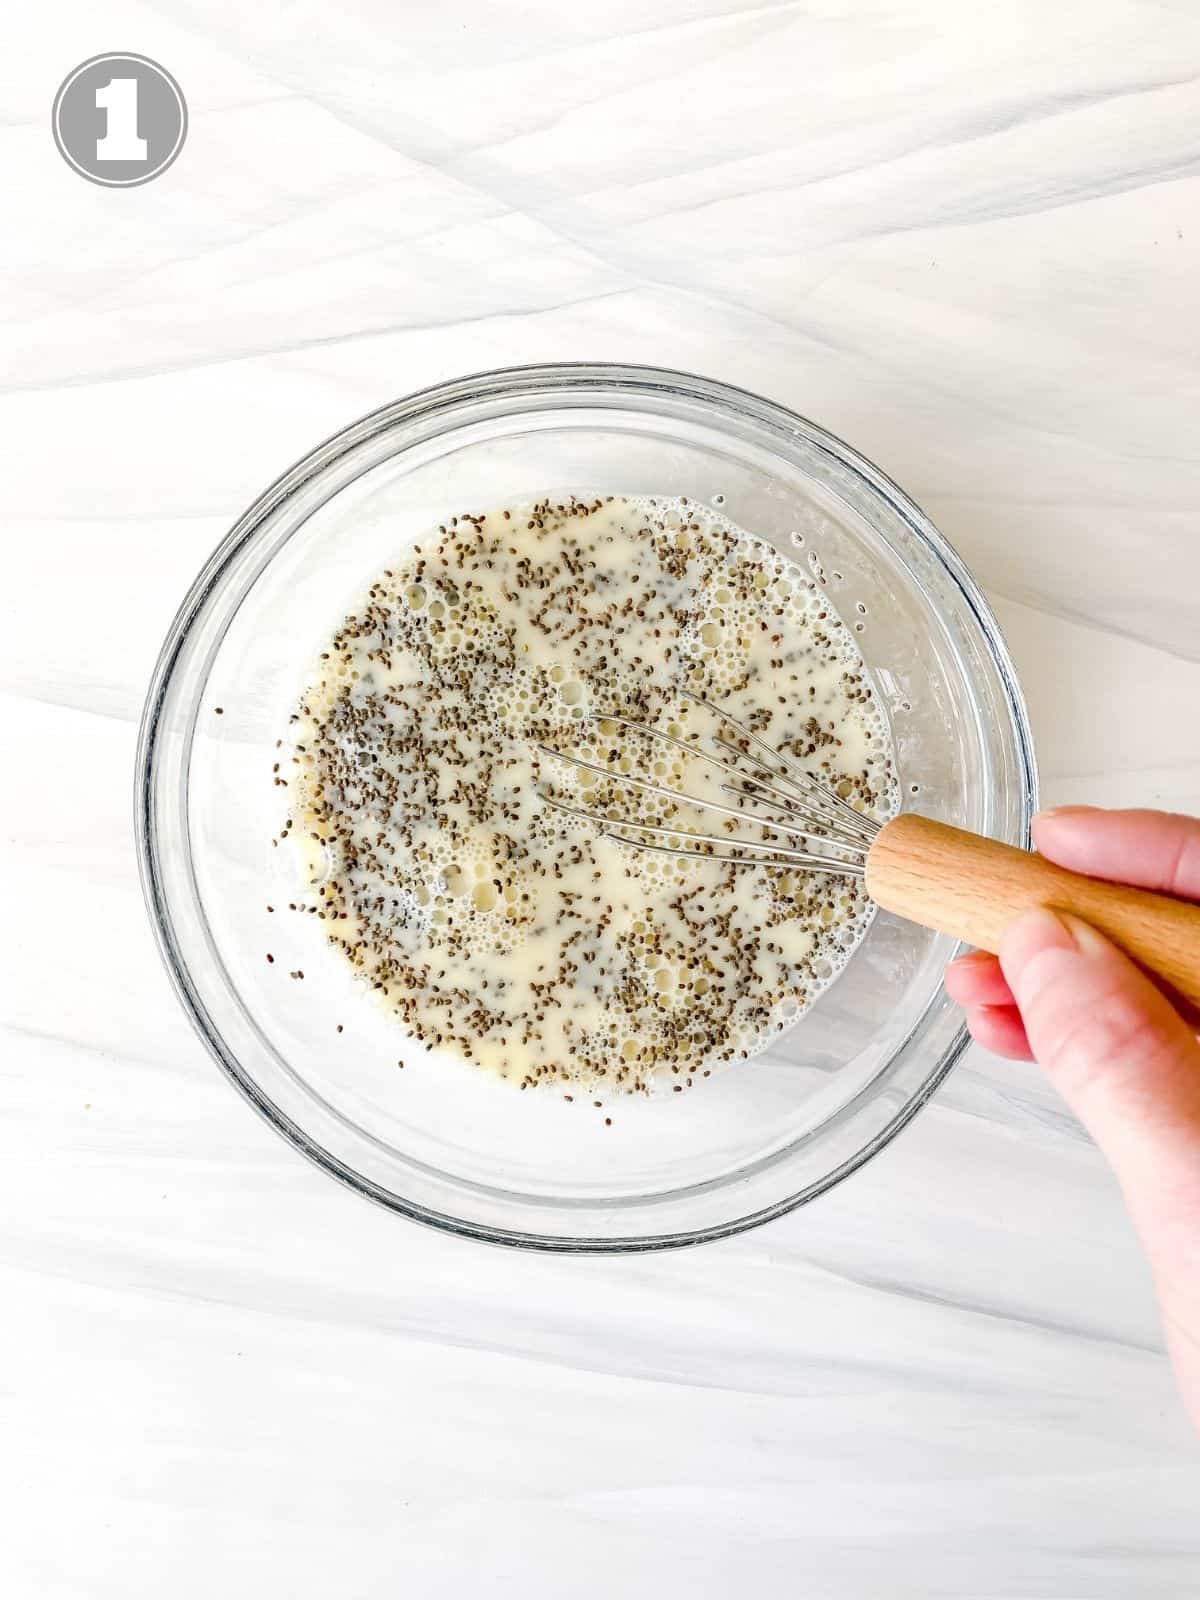 chia pudding being whisked in a glass bowl.